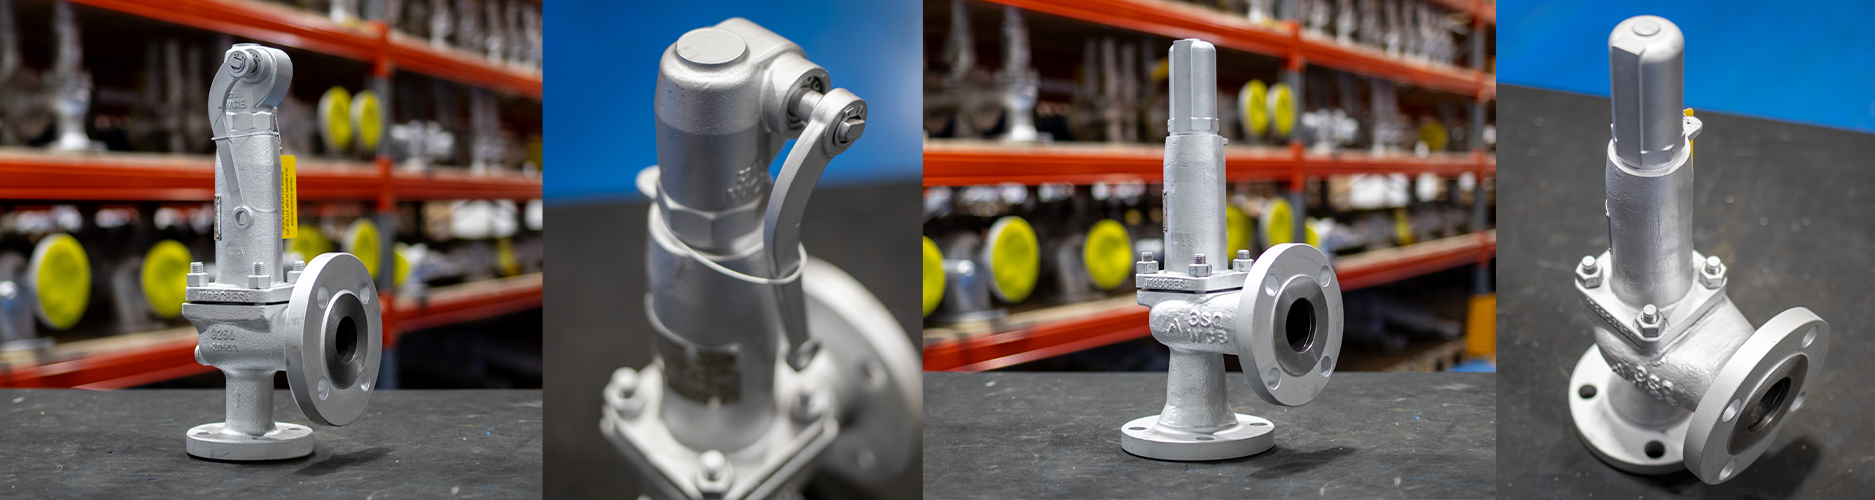 Buy BESA Safety Relief Valves from Safety Vavles Online